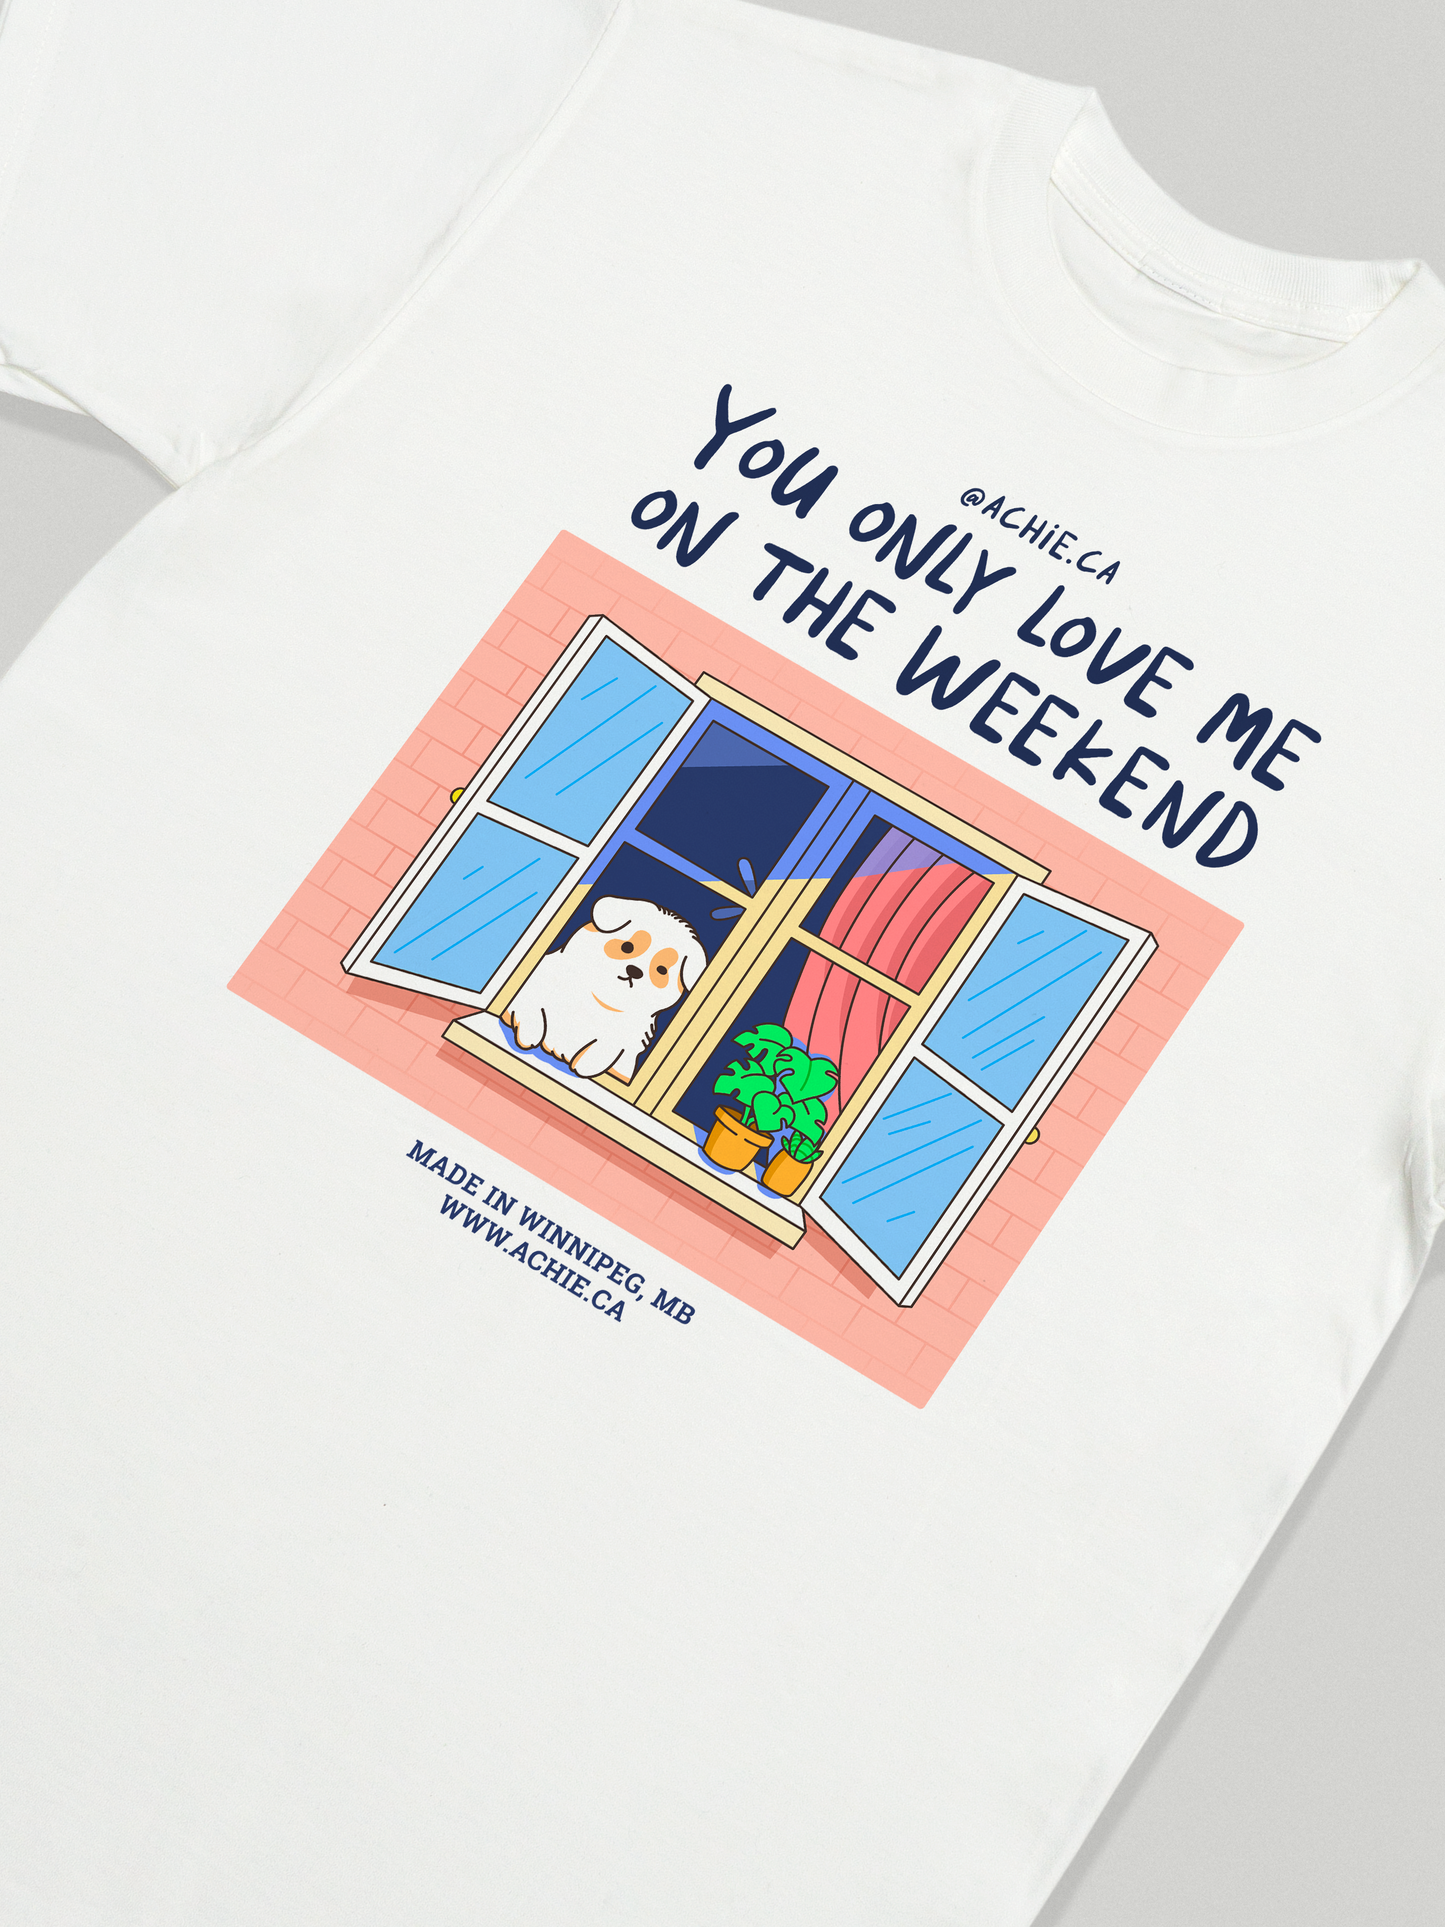 You only love me on the weekend T-Shirt